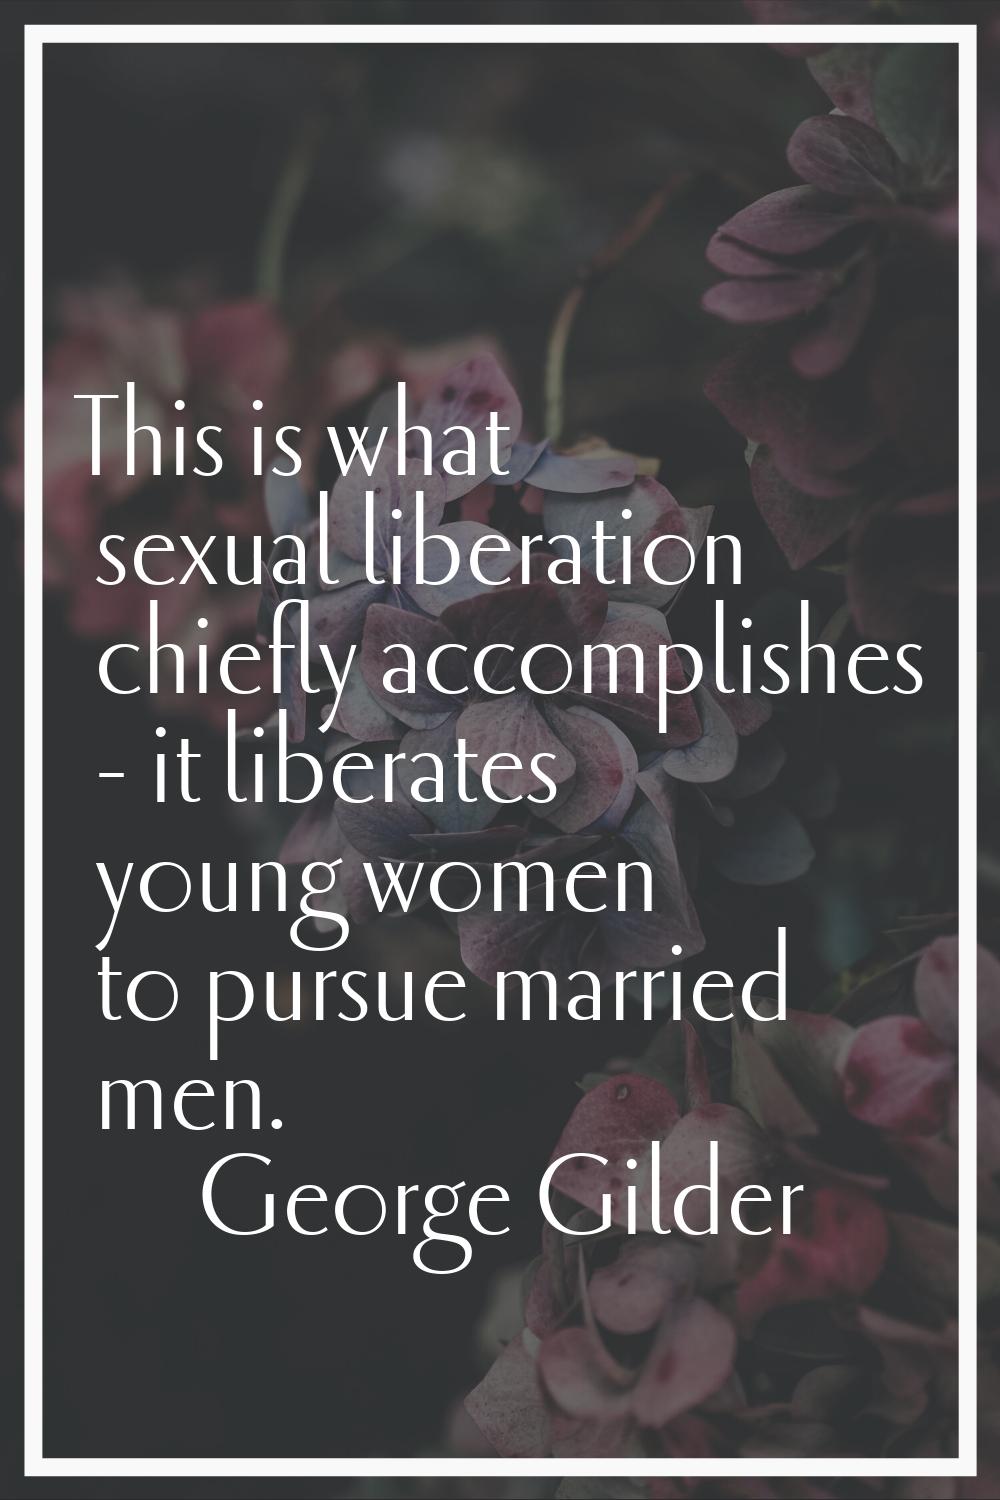 This is what sexual liberation chiefly accomplishes - it liberates young women to pursue married me